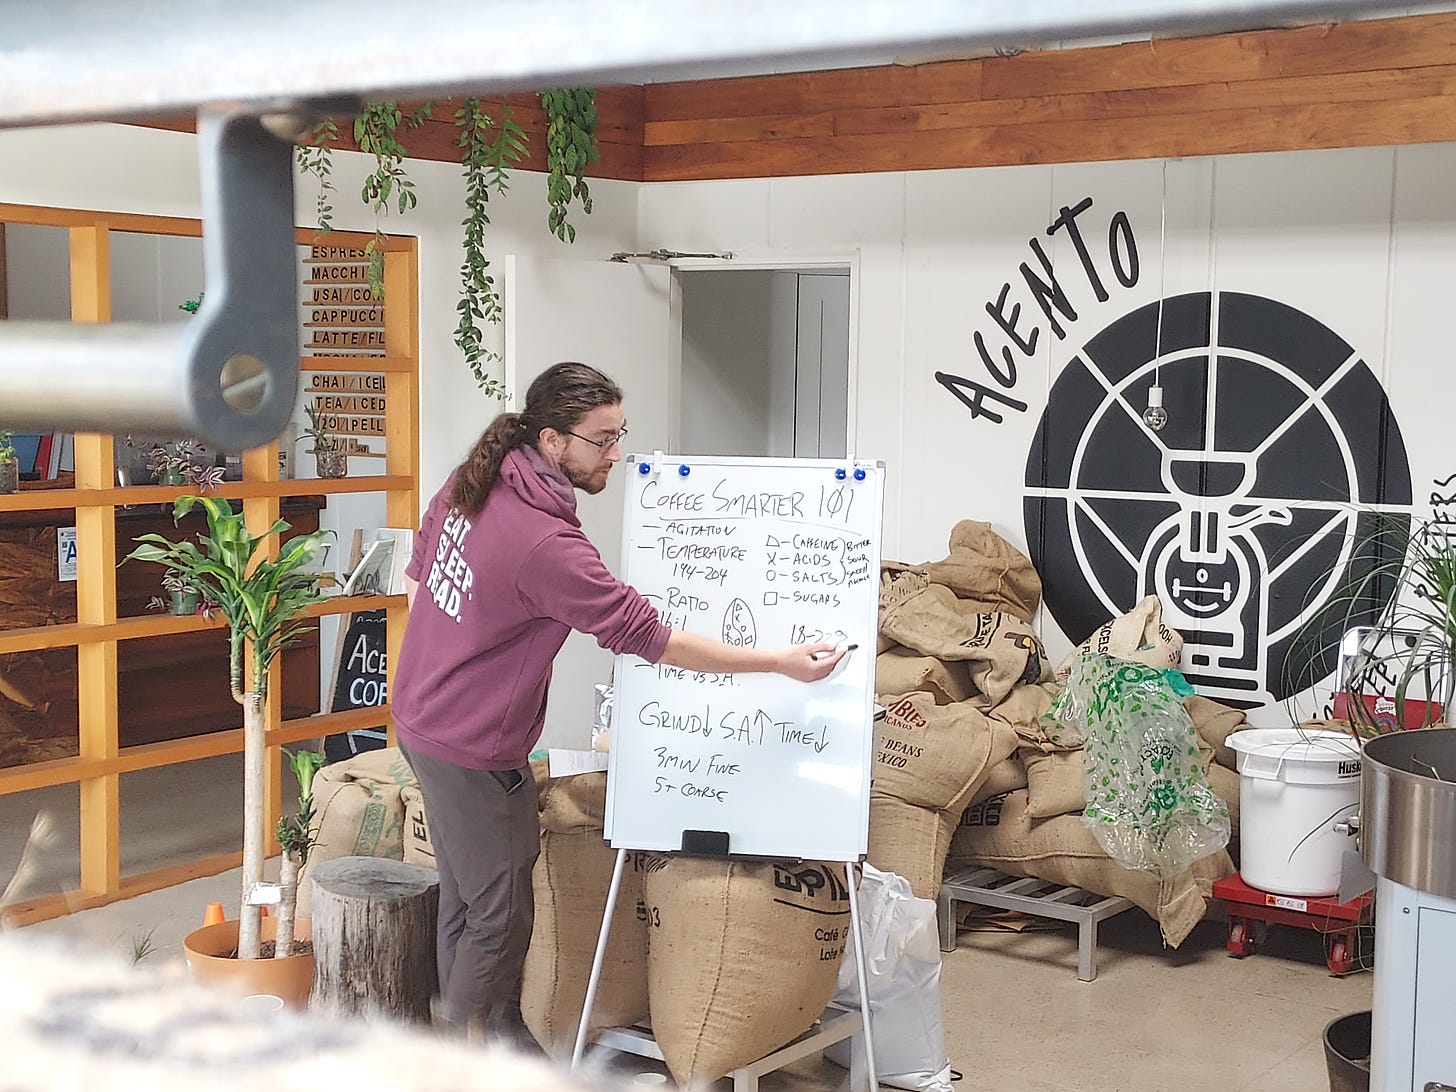 A pony-tailed man writes coffee chemistry facts on a white board set up in front of a bunch of green coffee in burlap sacks.